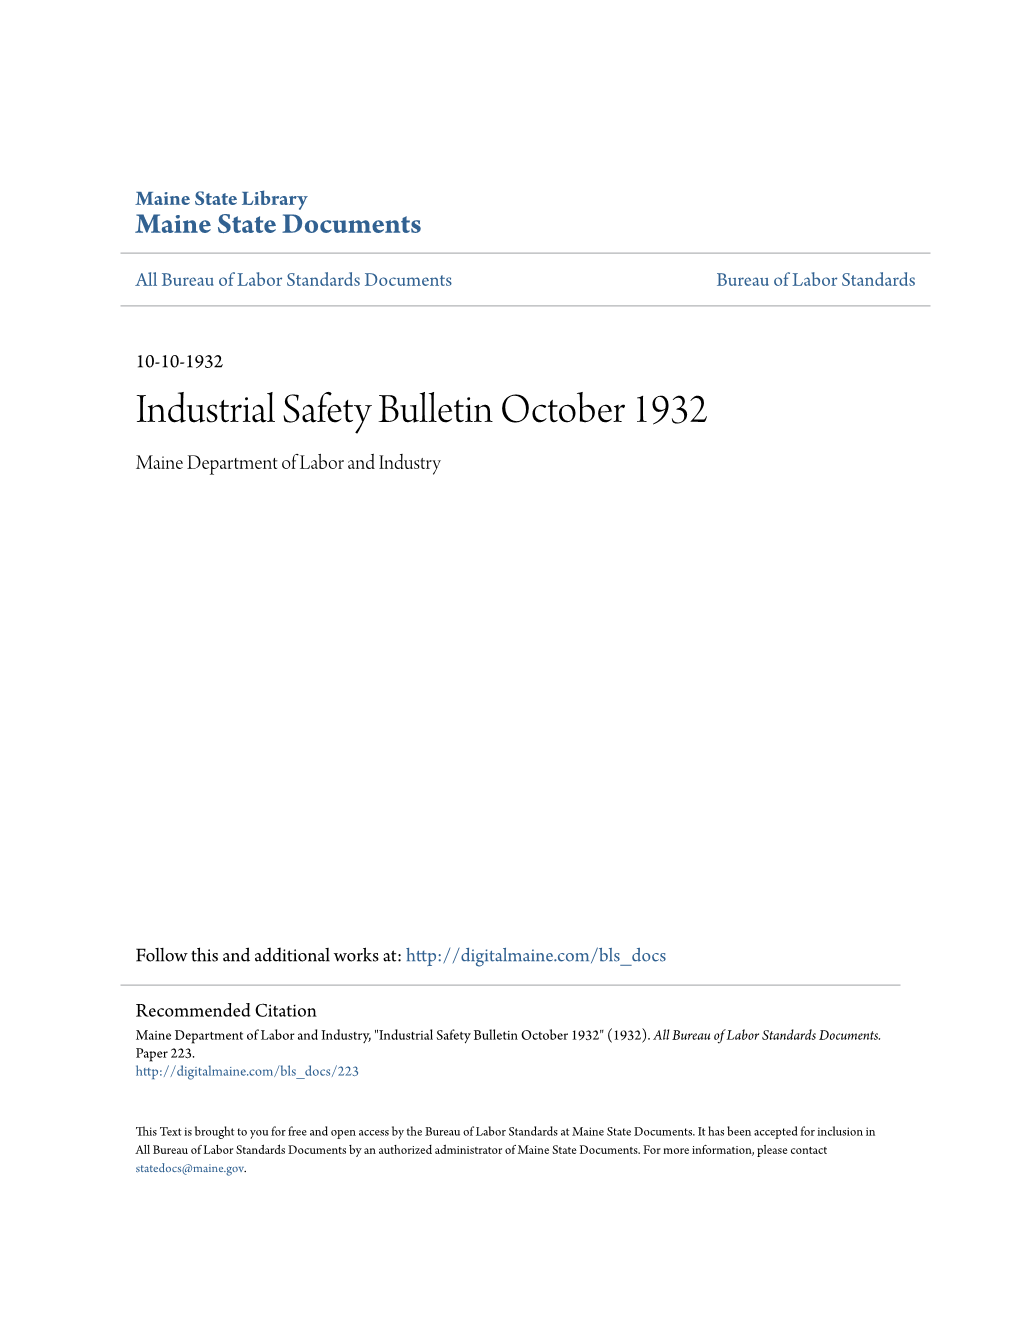 Industrial Safety Bulletin October 1932 Maine Department of Labor and Industry